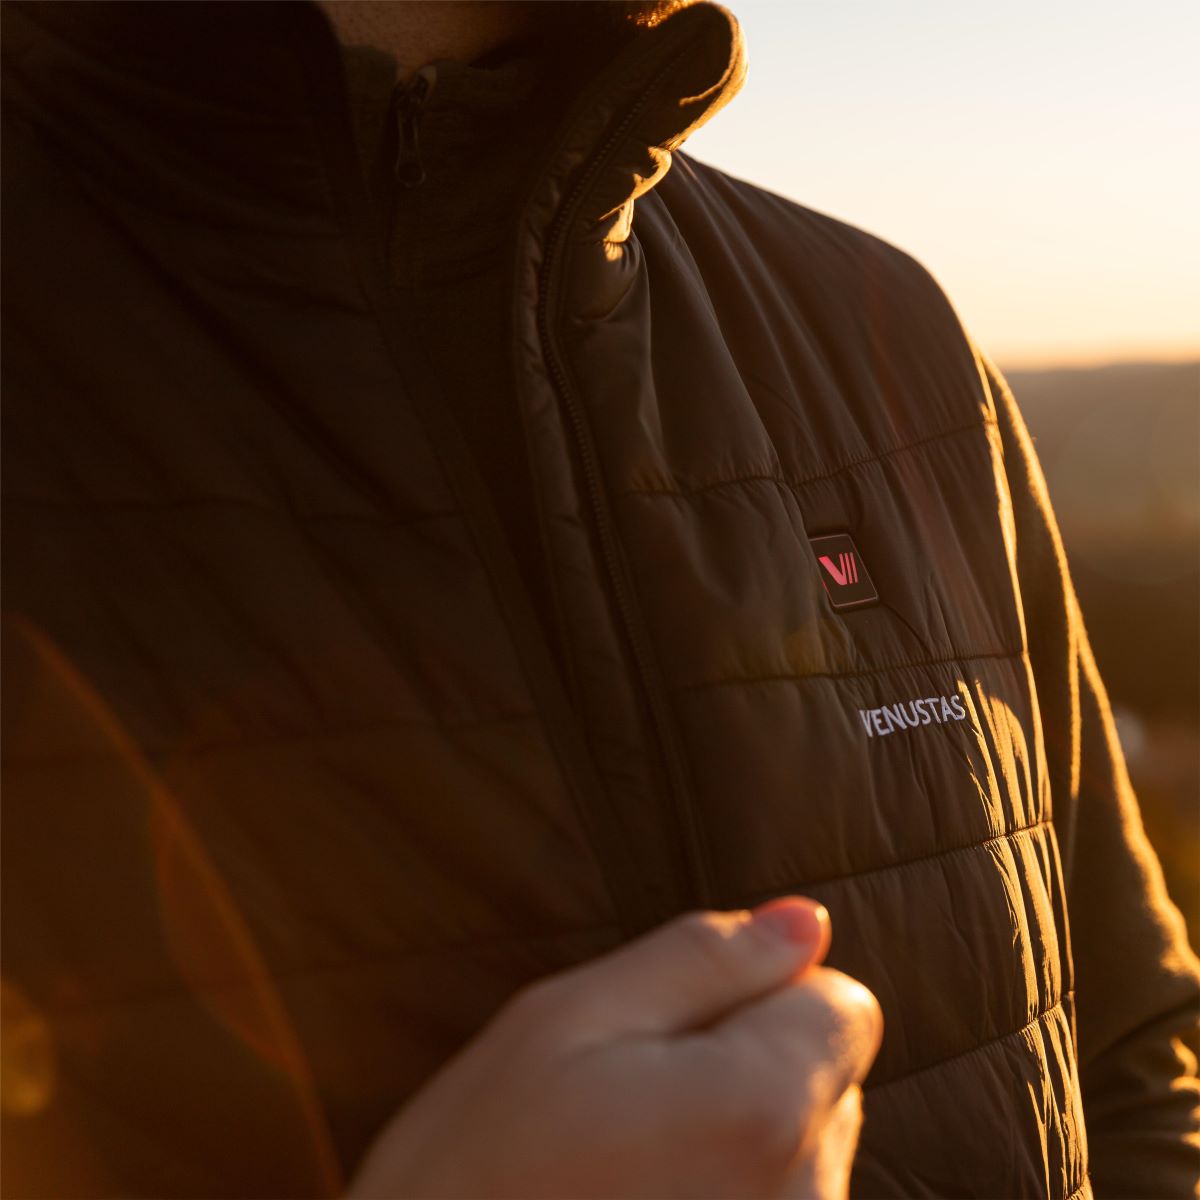 New Year Deals: Embrace the Warmth with Venustas Heated Apparel